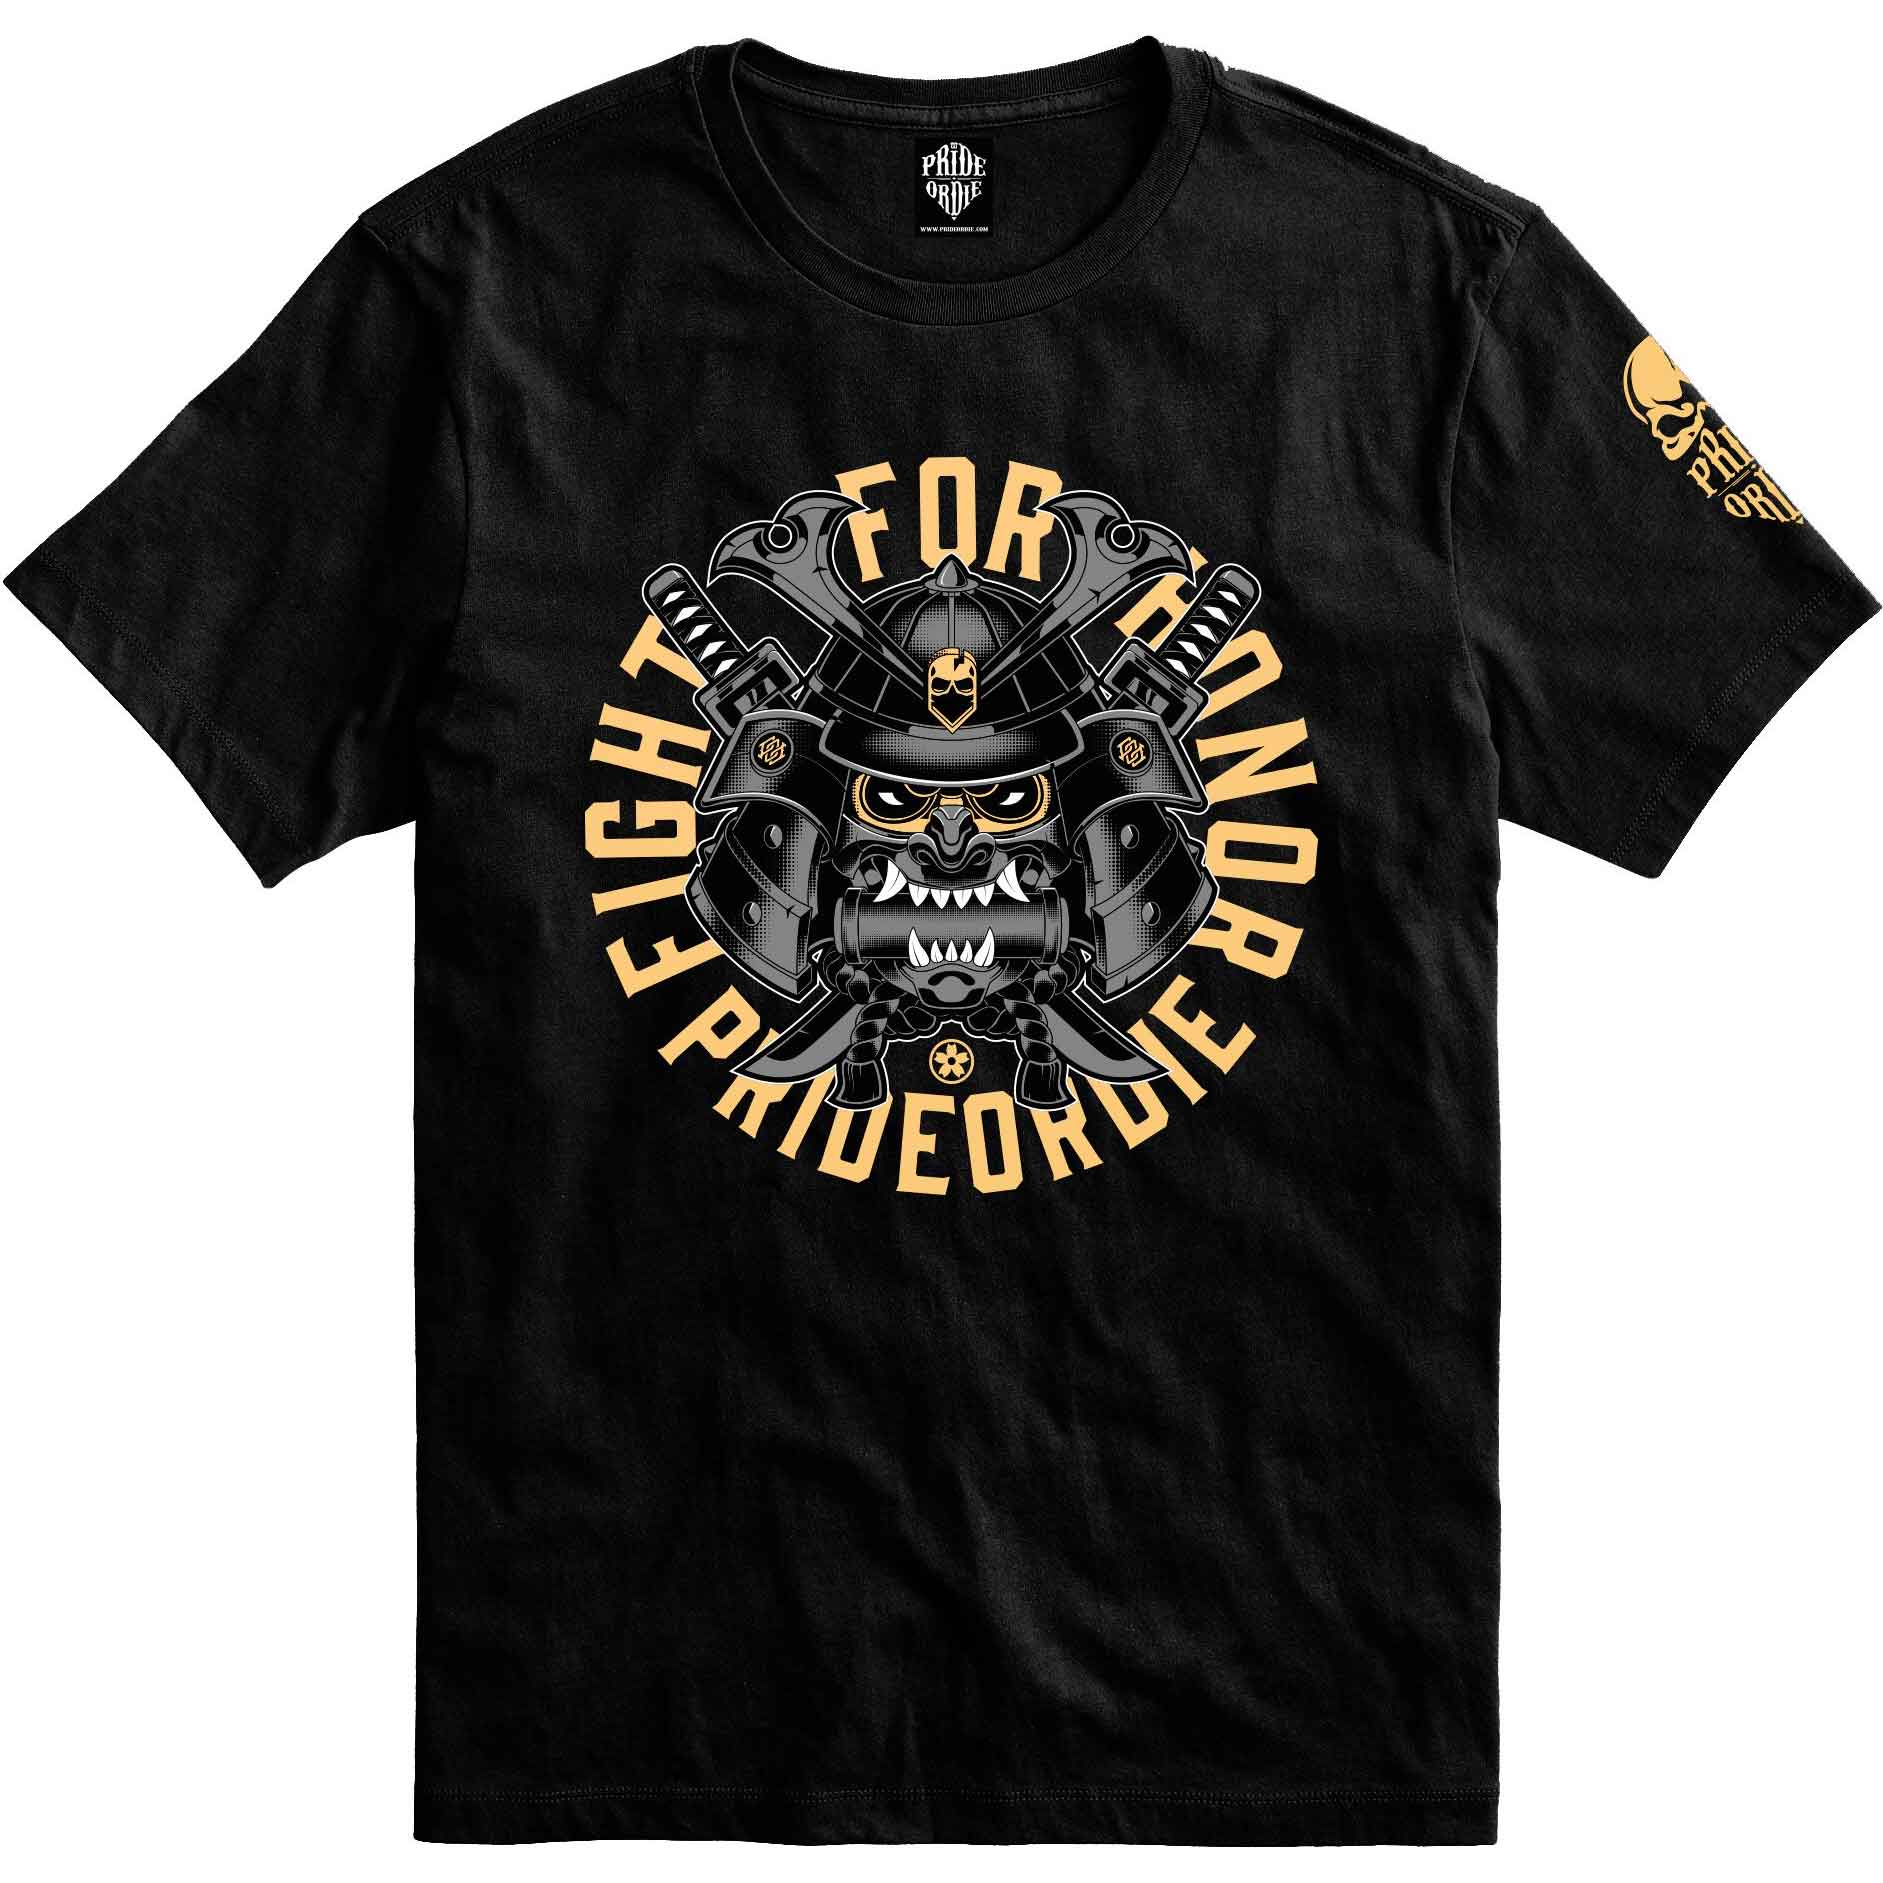 FIGHT FOR HONOR T-shirt／FIGHT FOR HONOR Tシャツ